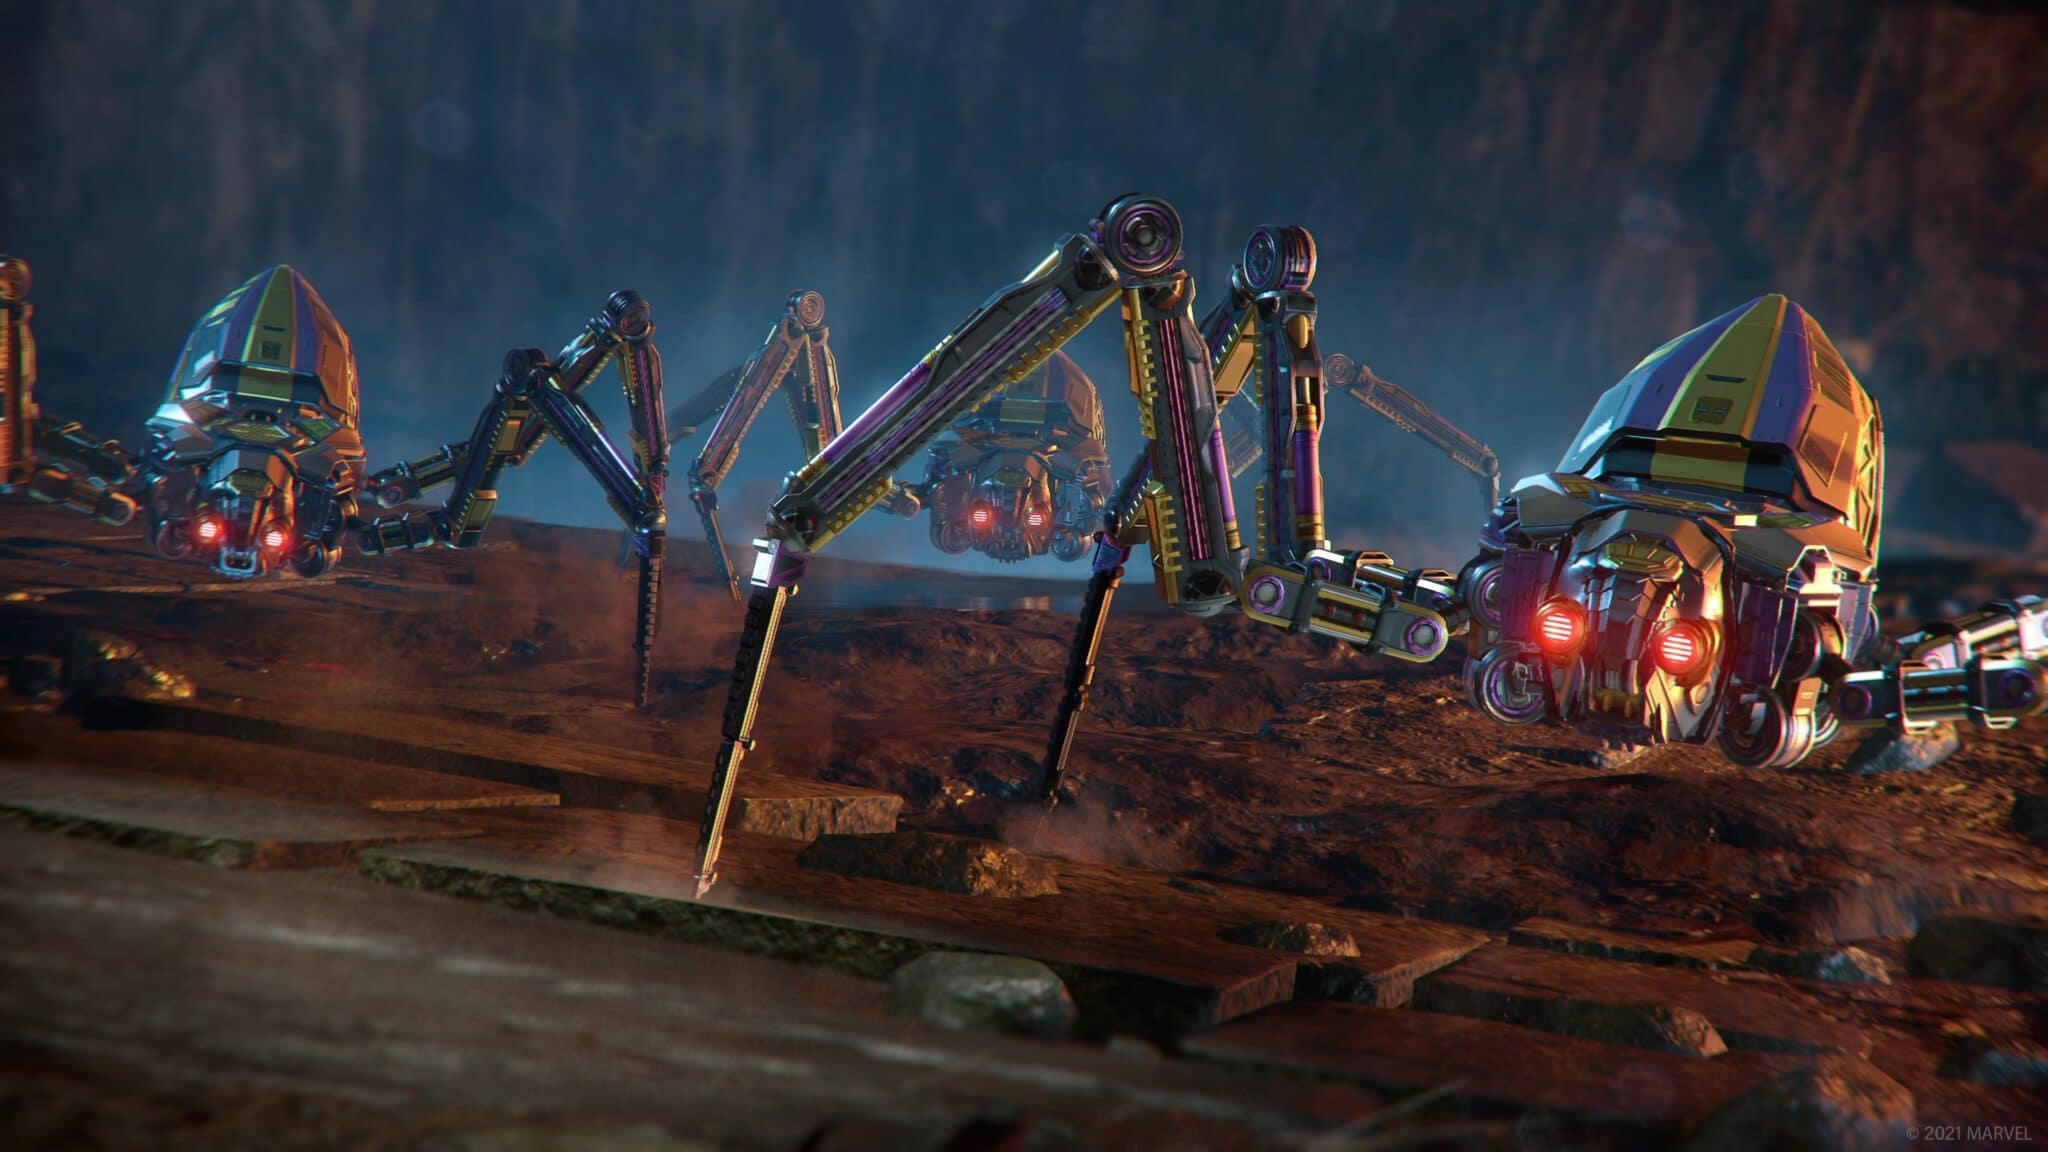 Besides the regular synths, there are also robot spiders now.